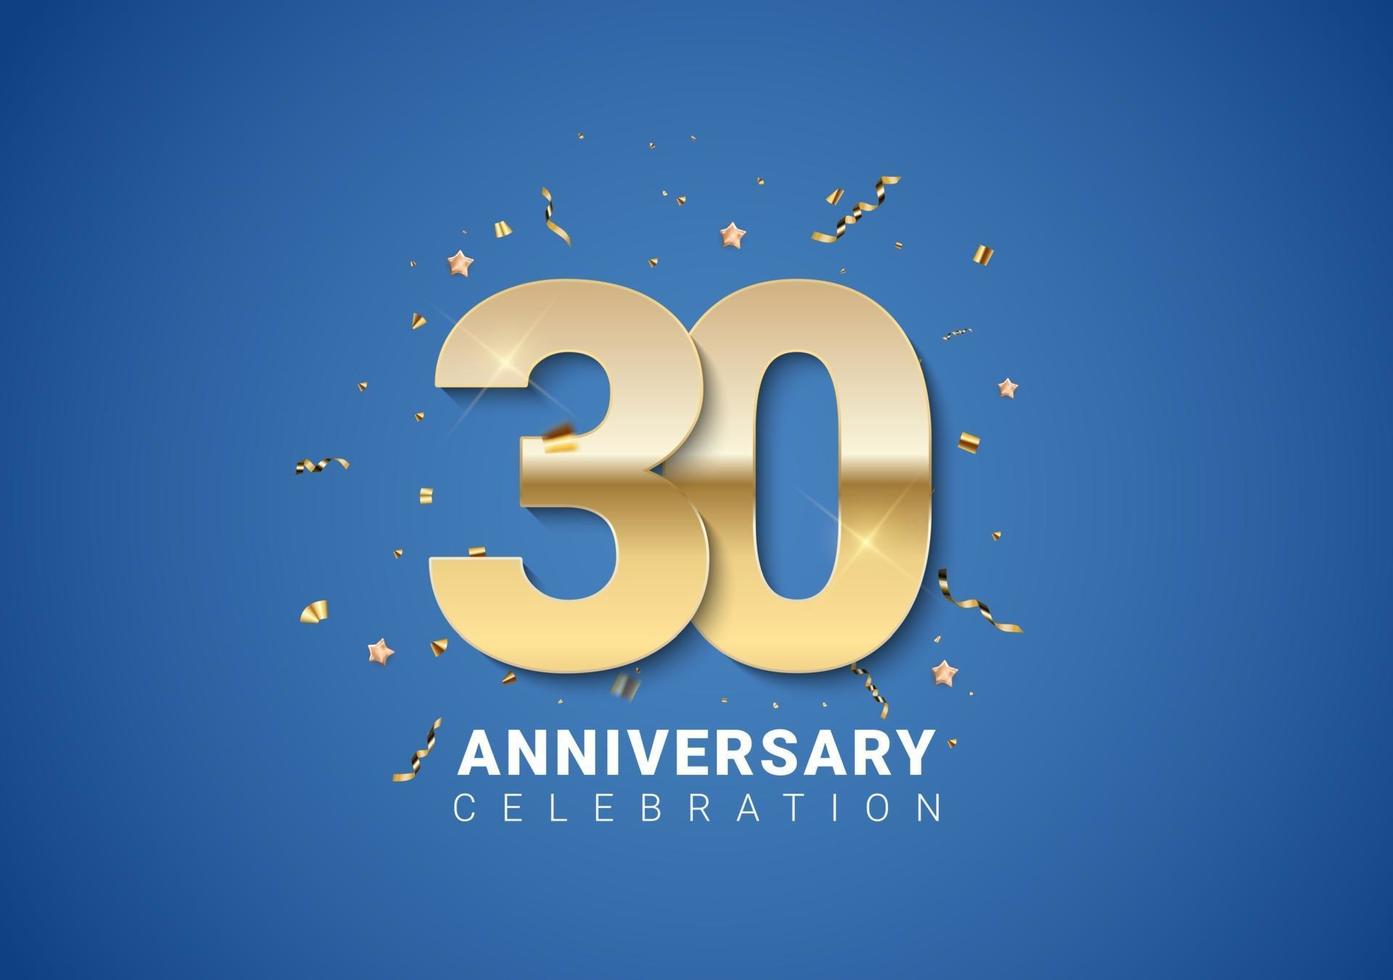 30 anniversary background with golden numbers, confetti, stars vector